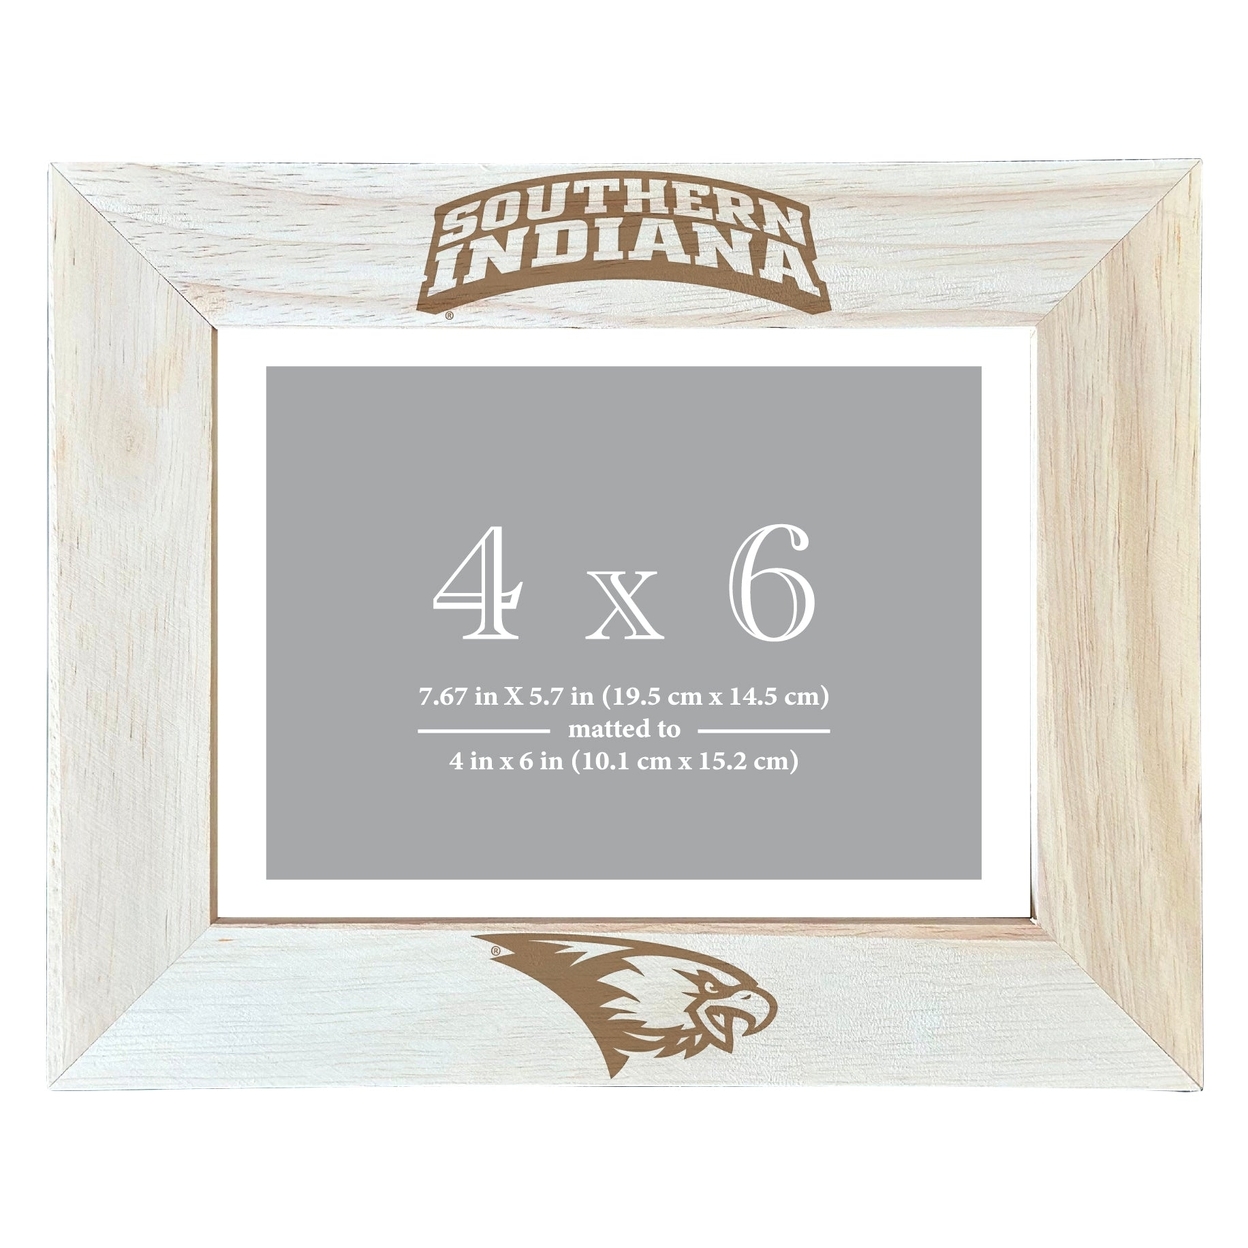 University Of Southern Indiana Wooden Photo Frame Matted To 4 X 6 Inch - Etched